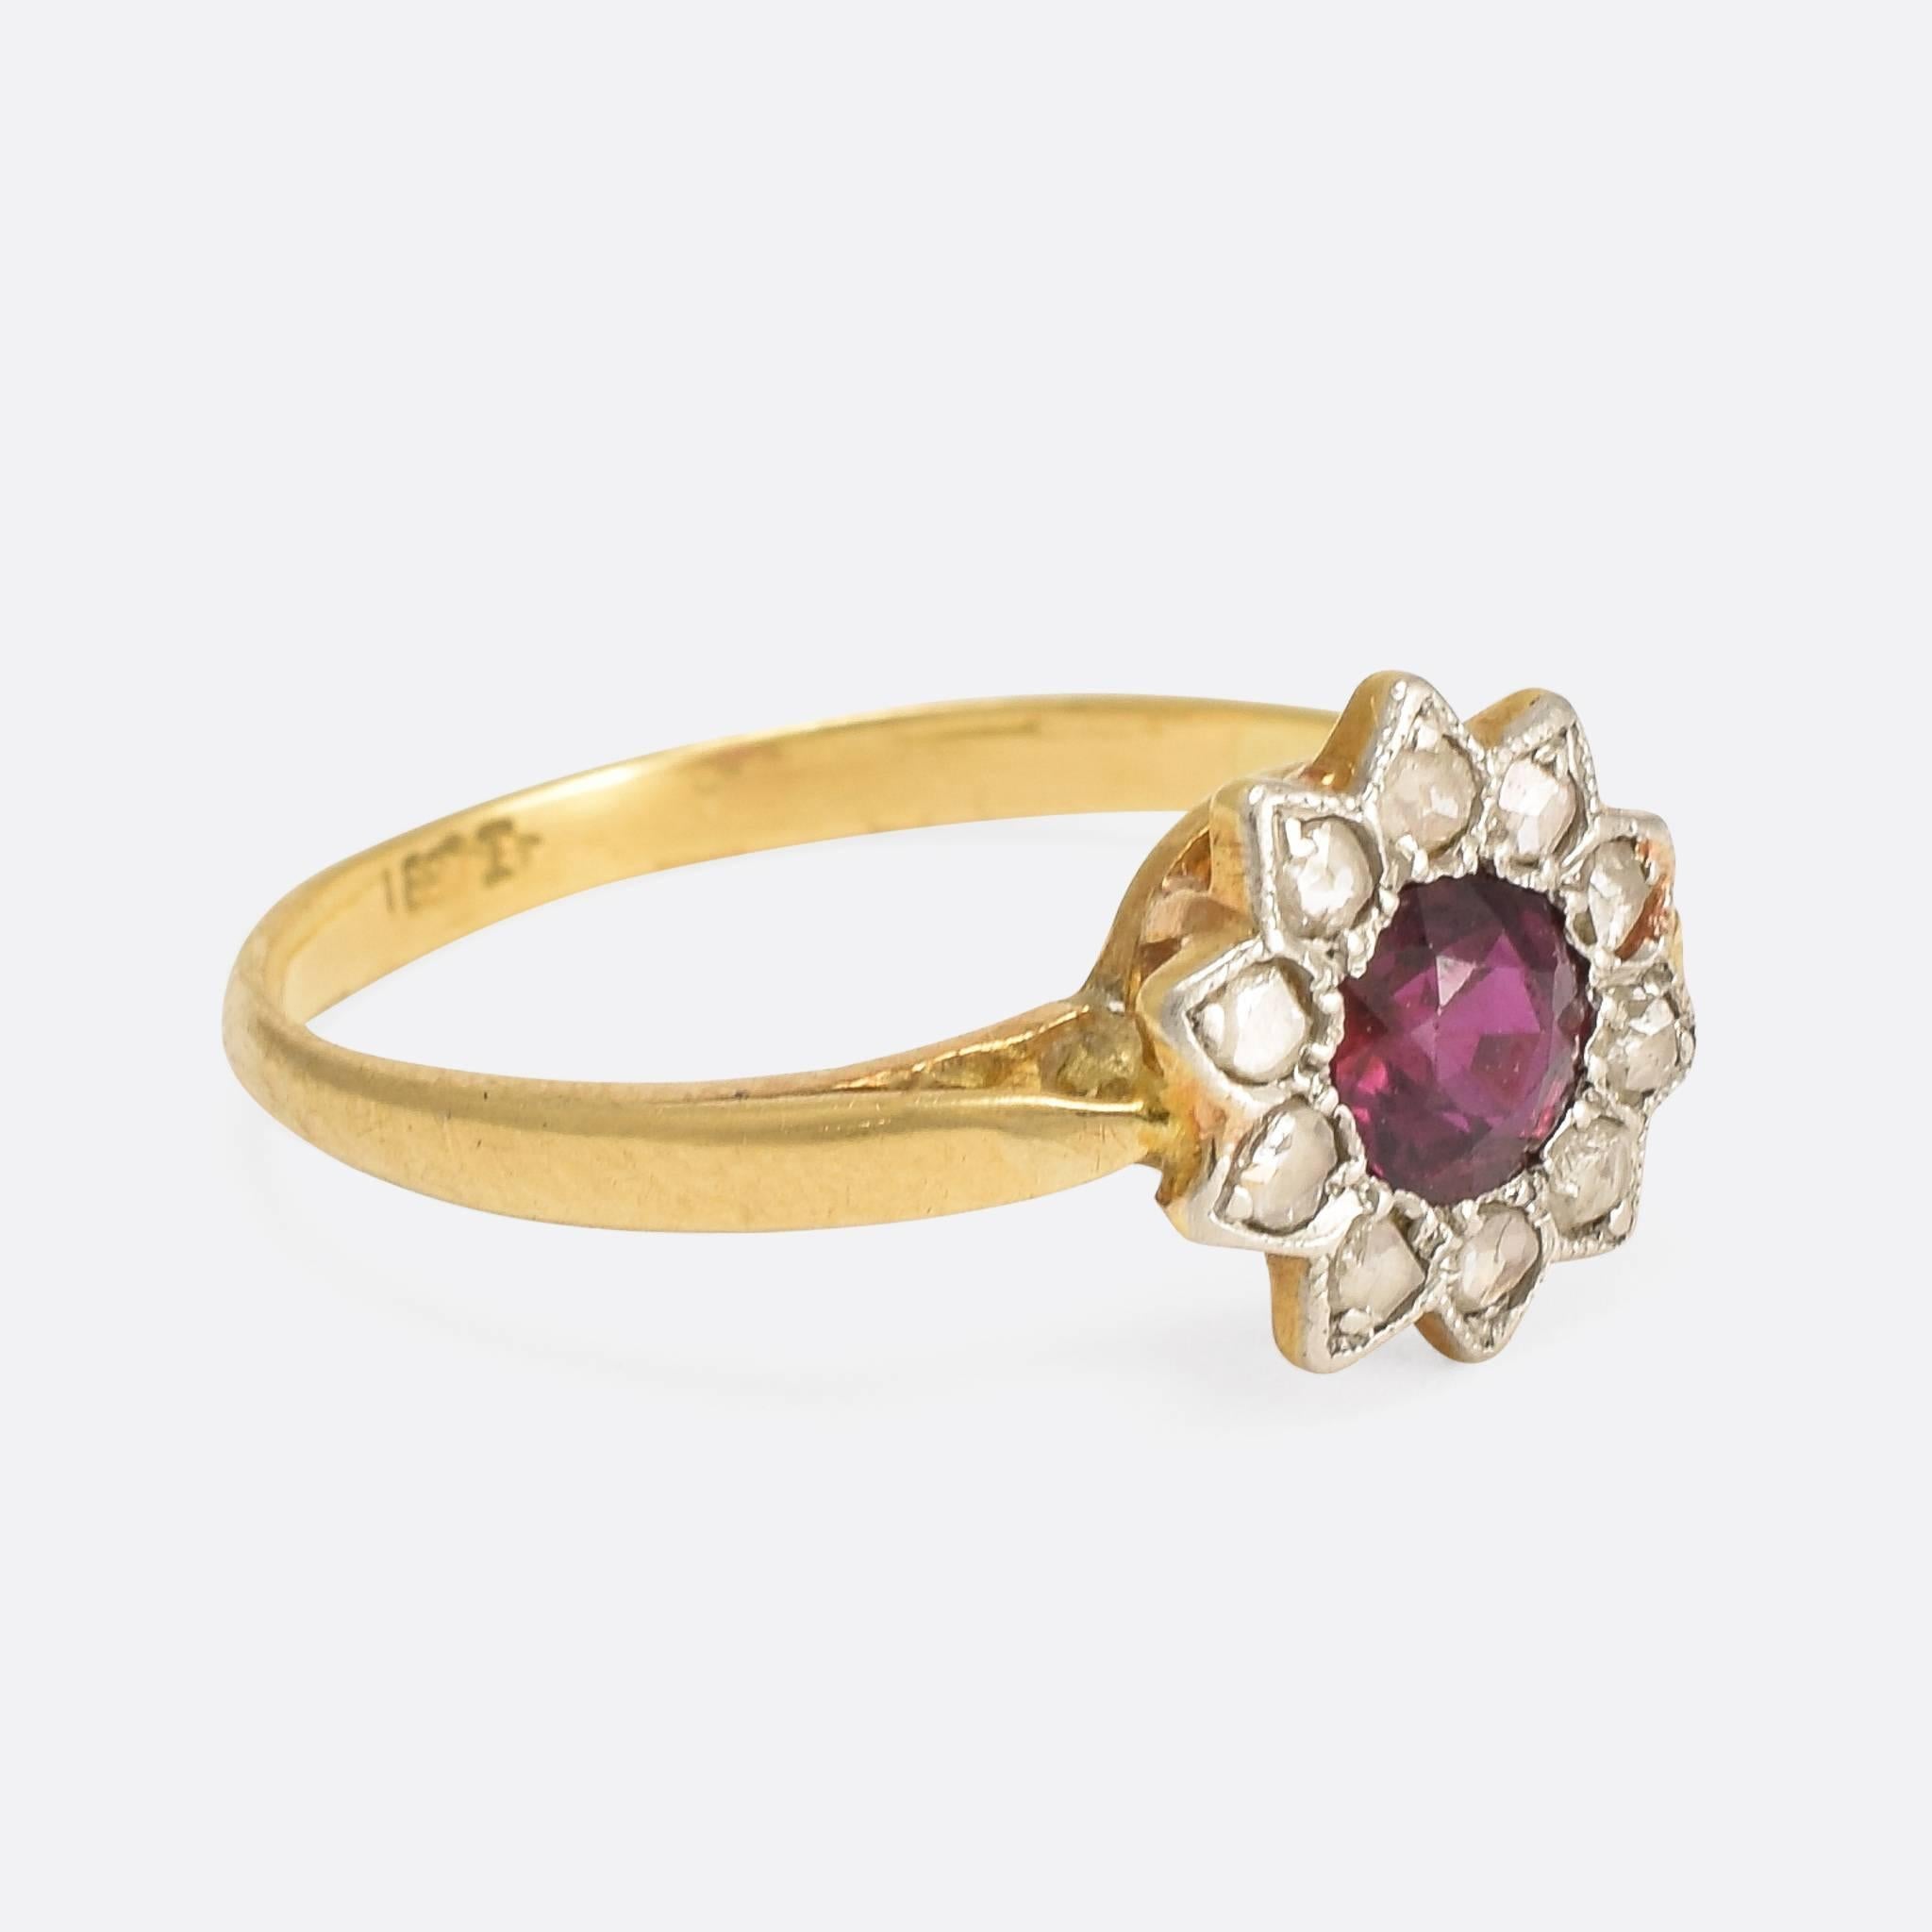 This adorable antique flower ring pretty and striking at the same time, with unusual pointed (sunflower-esque) petals and a fabulous central ruby, of exceptional colour. The head is finished in millegrain platinum, and the band modelled in rich 18ct